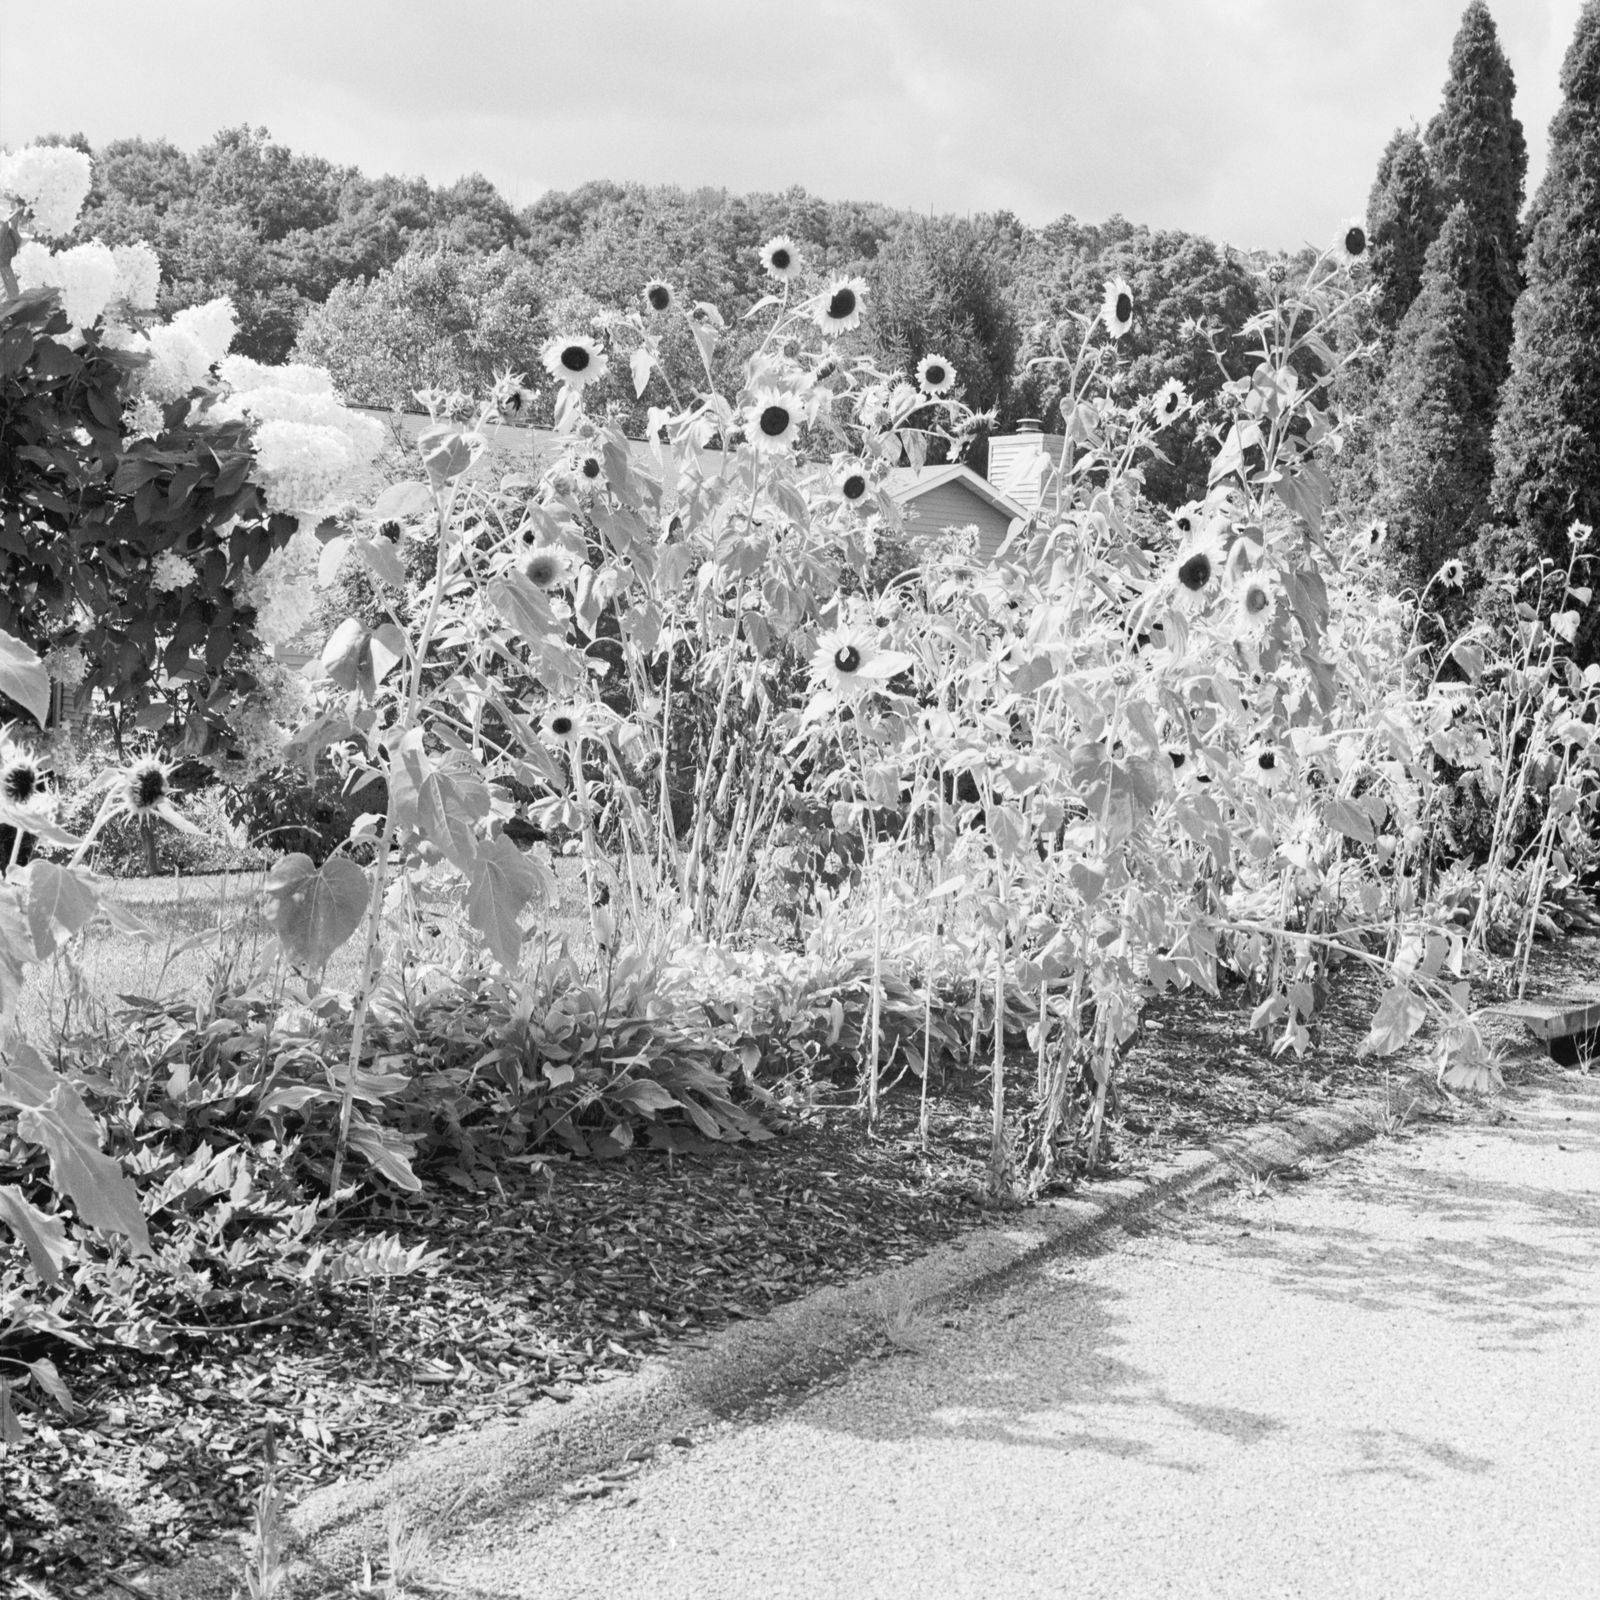 © Isabella Convertino - Sunflowers, 2020. Archival Pigment Print, 7.5in x 7.5in.